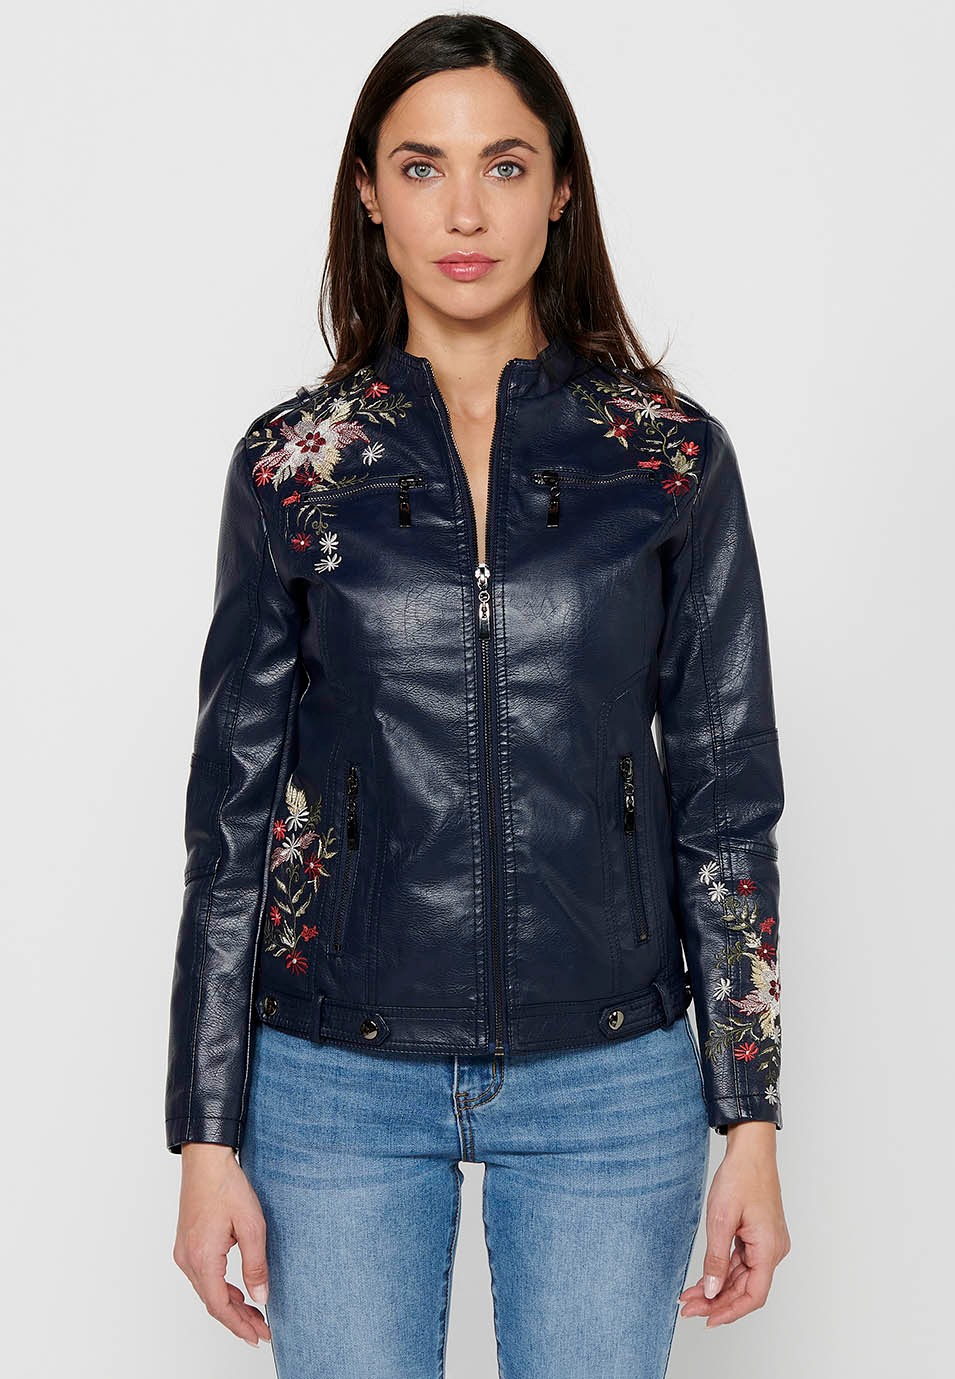 Leather-effect jacket with front zipper closure with floral embroidered details with round neck and front pockets in Navy for Women 4